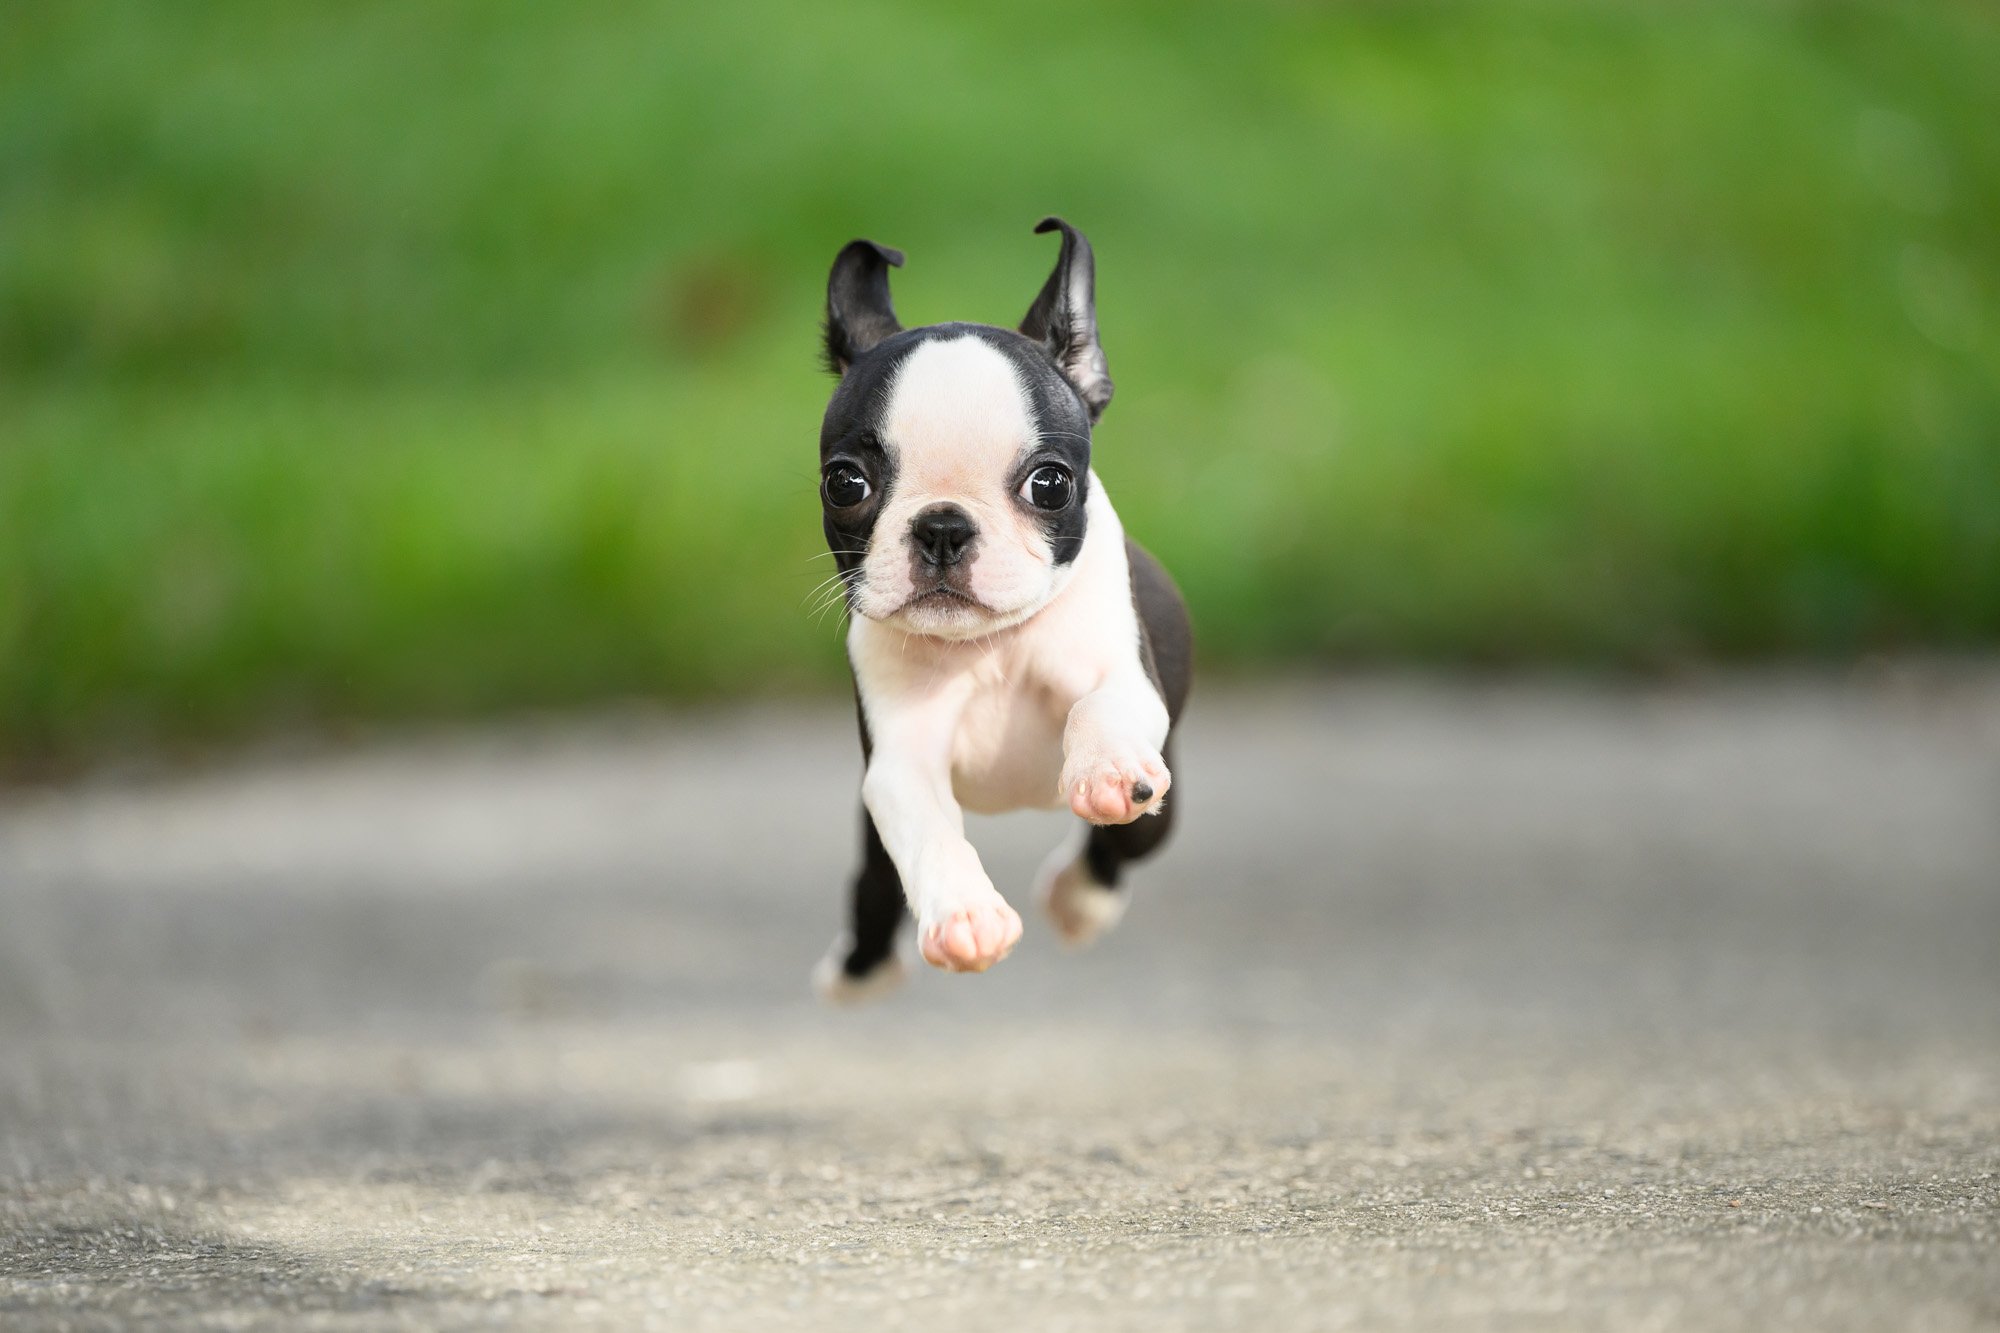 puppy jumping as she is running with all 4 paws off the ground